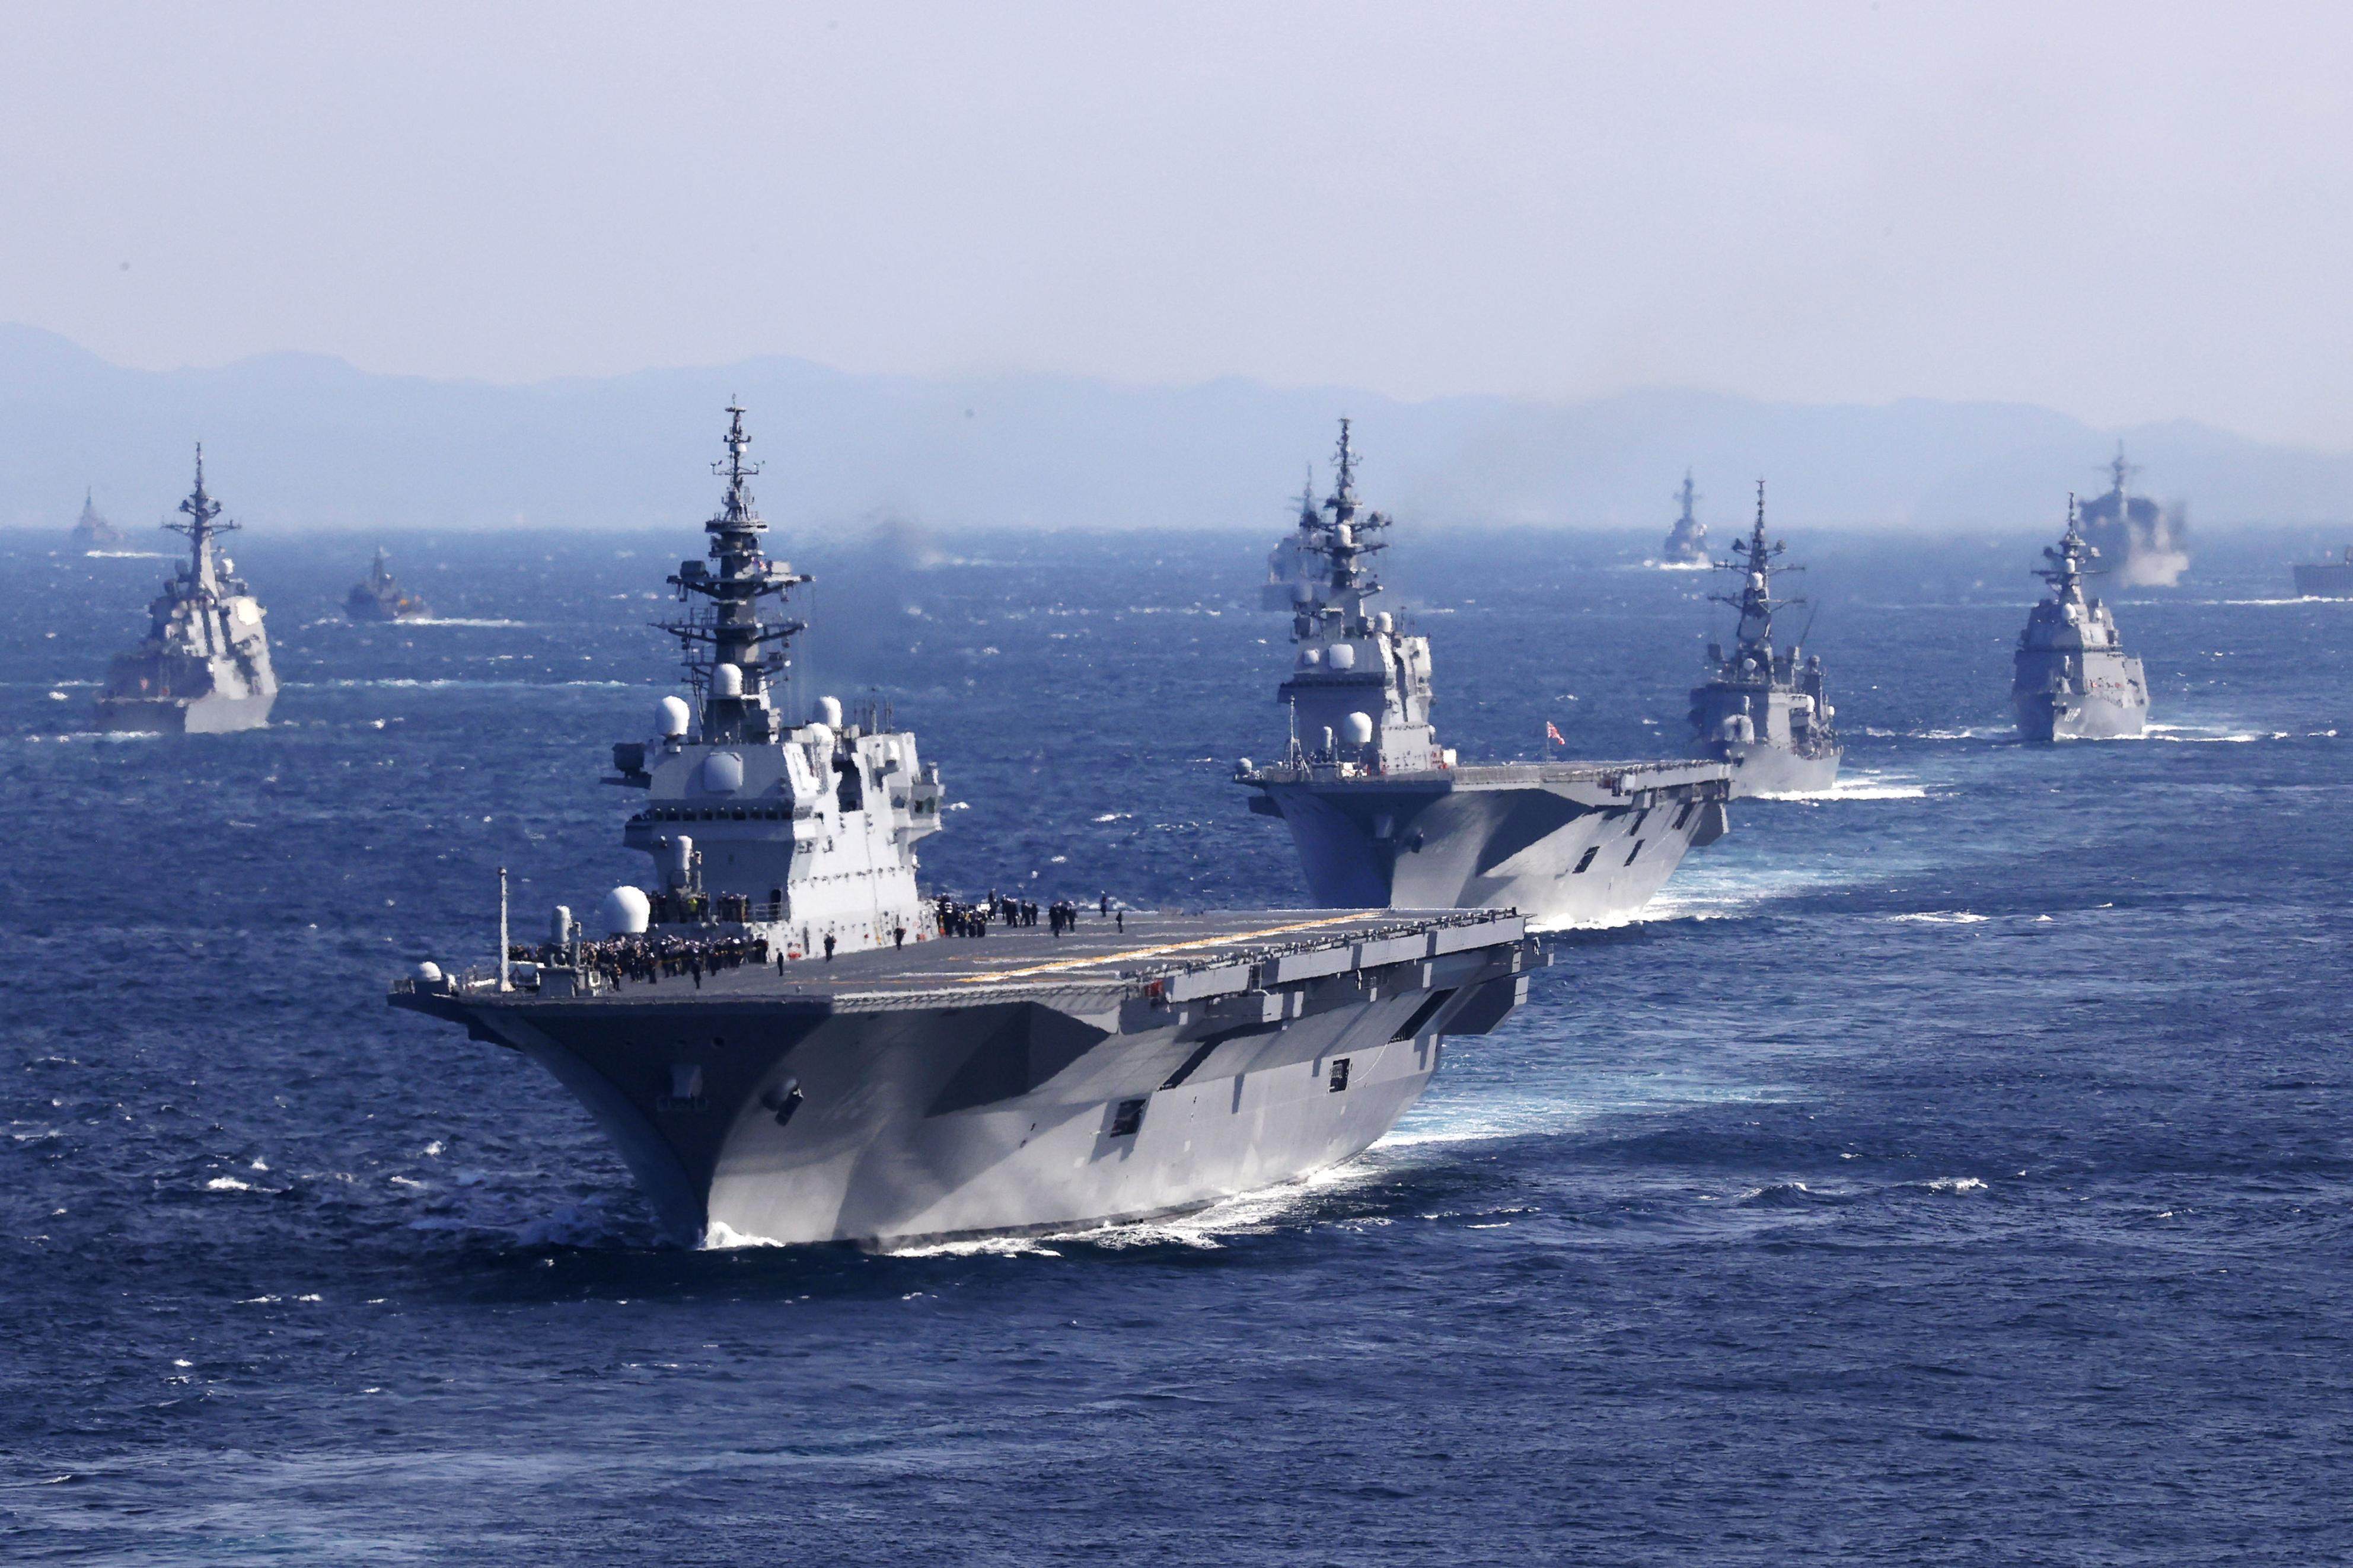 The helicopter destroyer Izumo of Japan’s Maritime Self-Defence Force seen with other warships in November 2022. Photo: Kyodo News via AP